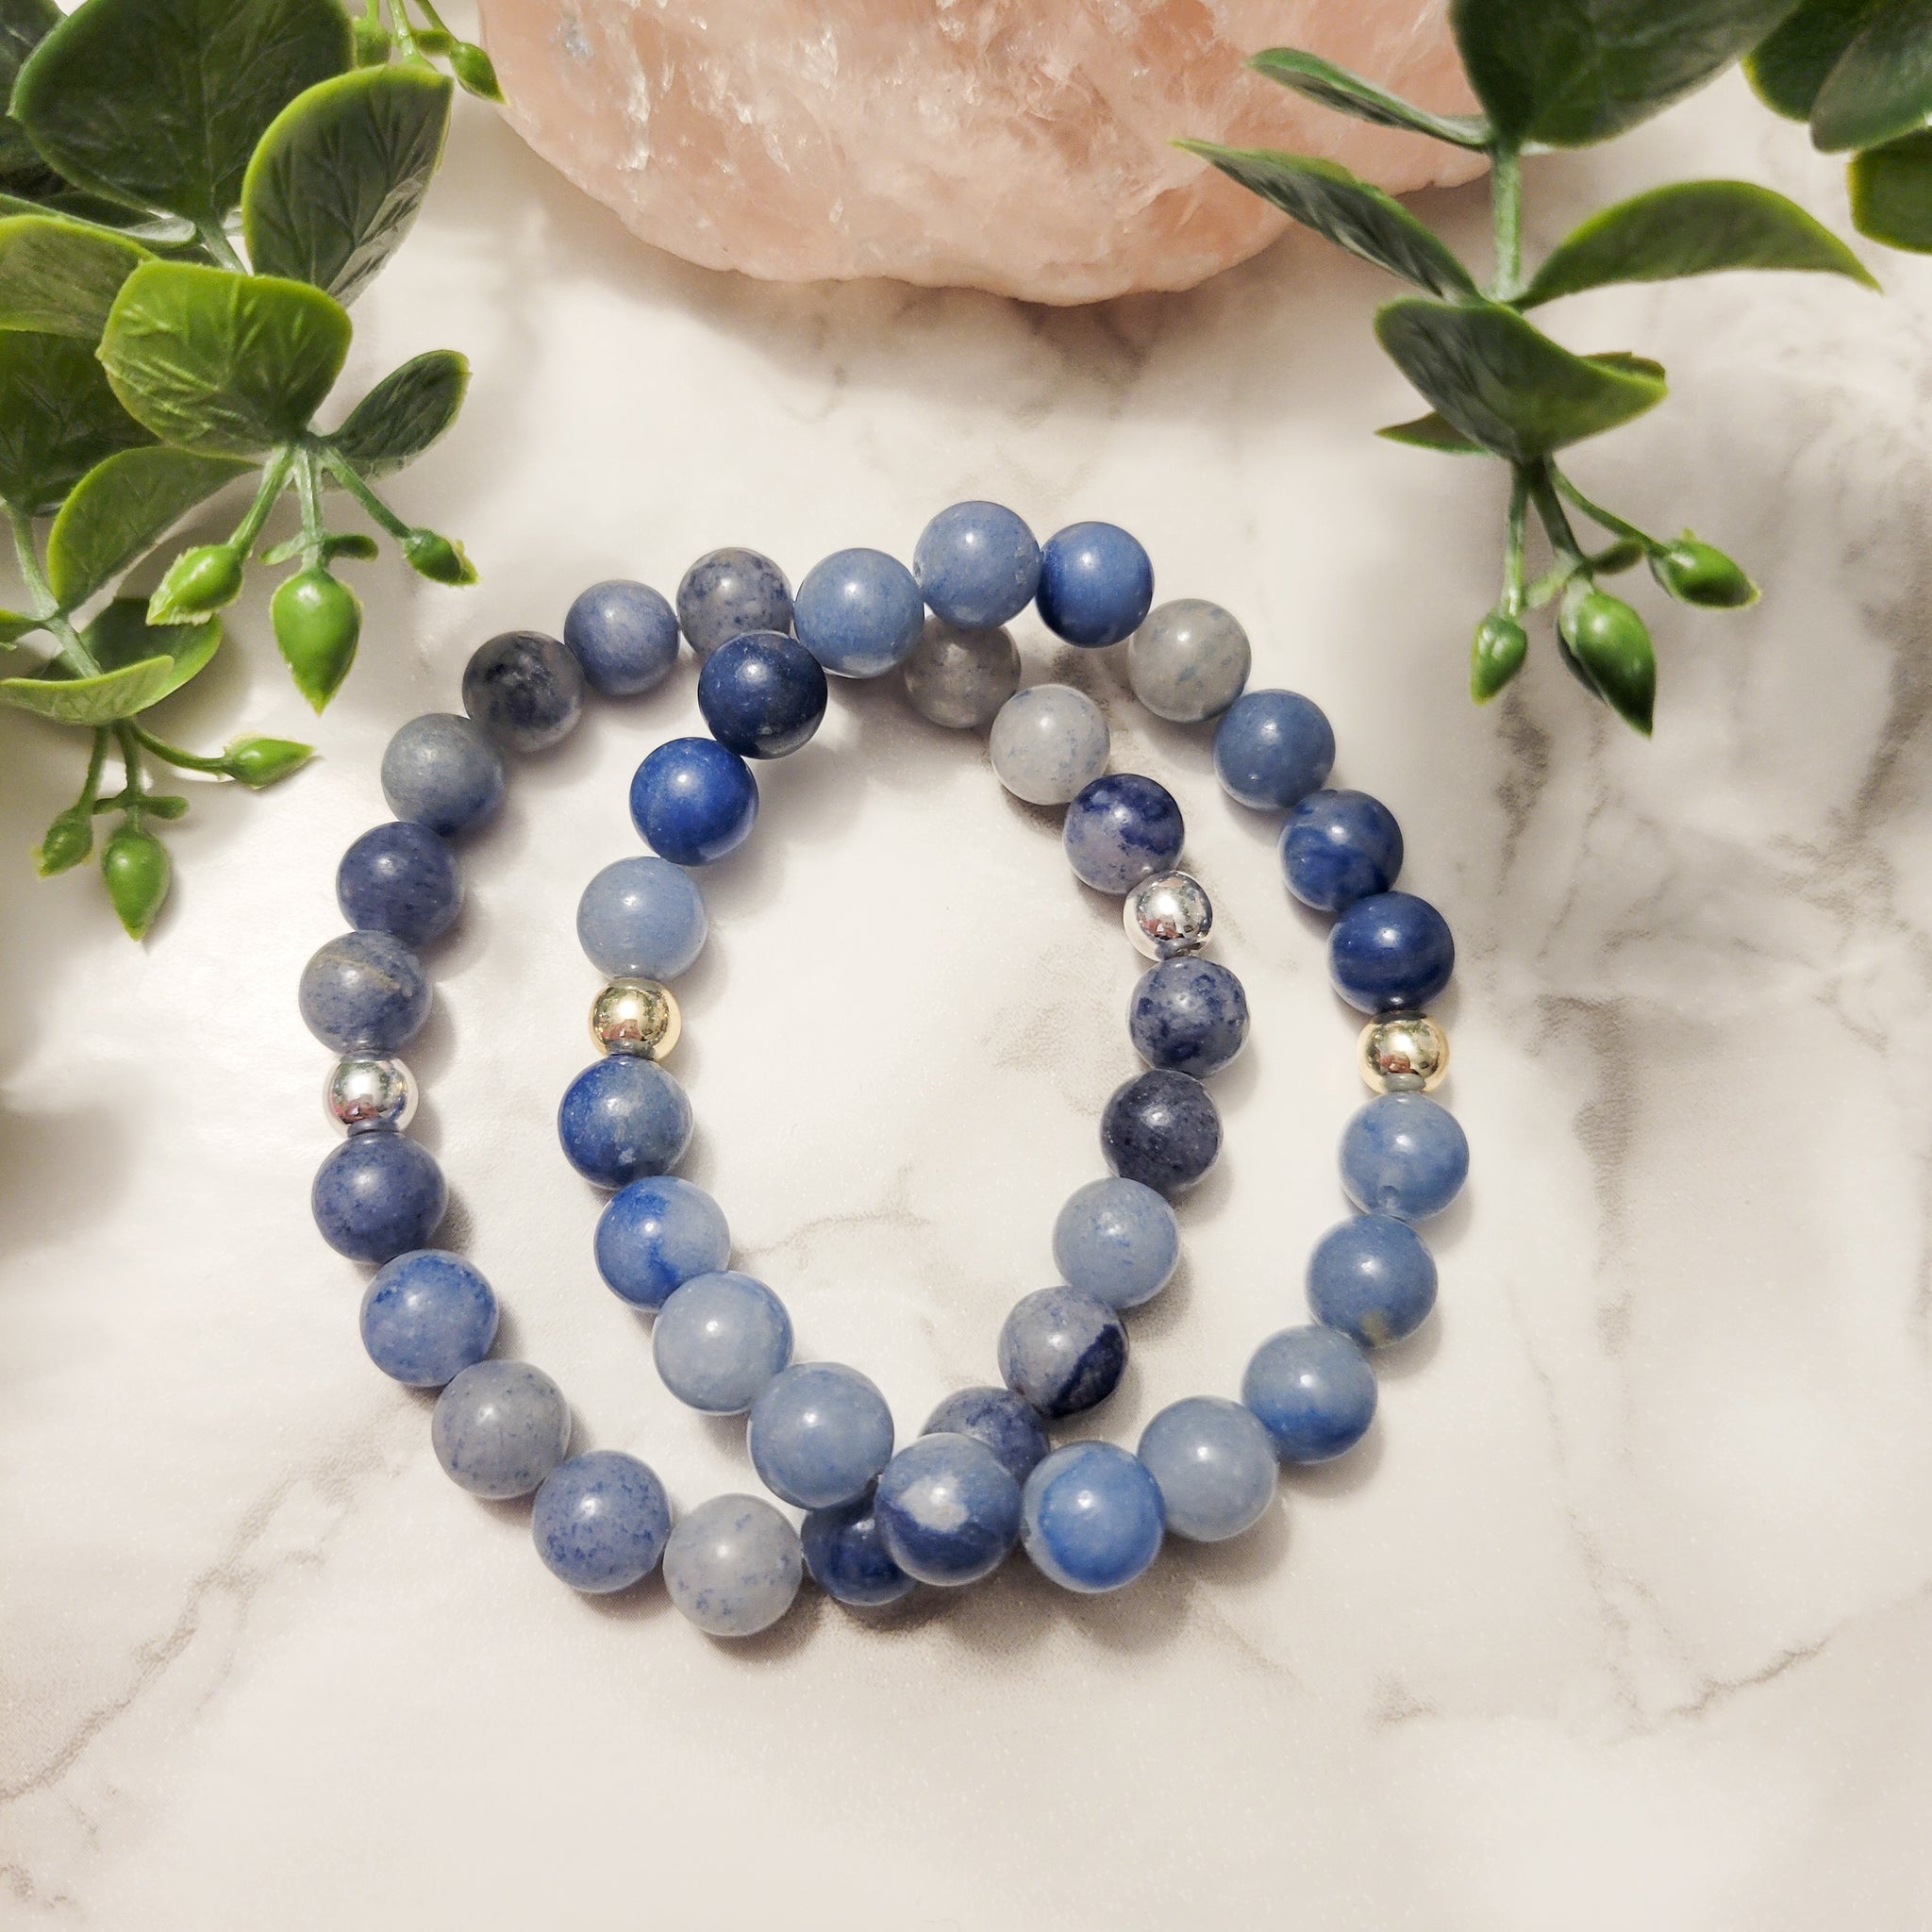 Amazon.com: Beaded Crystal Bracelets Jewelry for Women Bring Good Luck and  Prosperity Handmade with 8mm Blue and Purple Aventurine Healing Spiritual  Crystal Stone Yoga Accessories Bracelets Gifts for Women 6.5